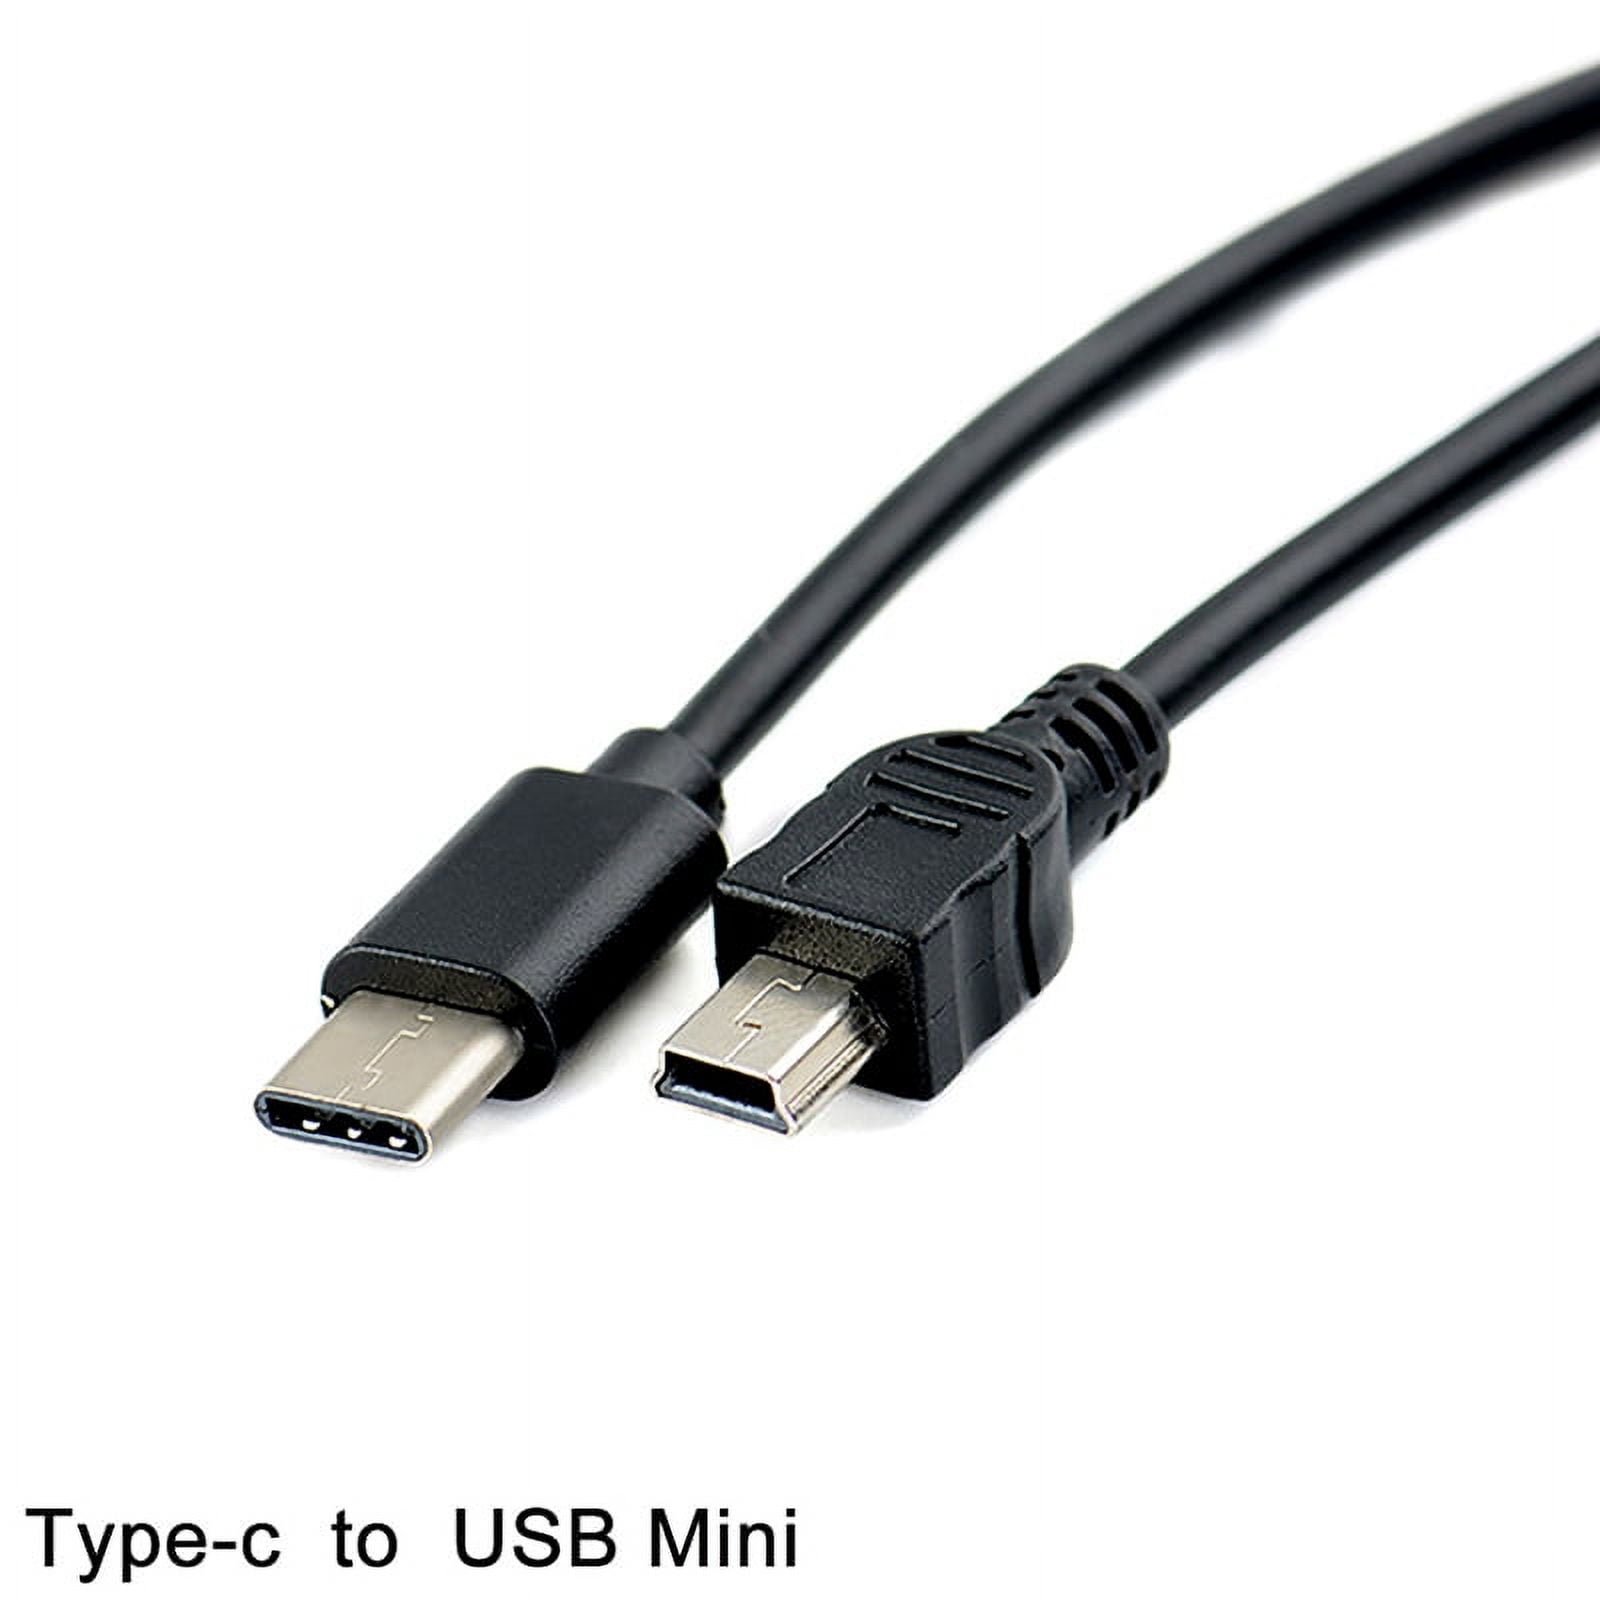 Mmucco Usb Type-C To Mini Usb Cable Usb-C Male To Mini-B Male Adapter  Converter